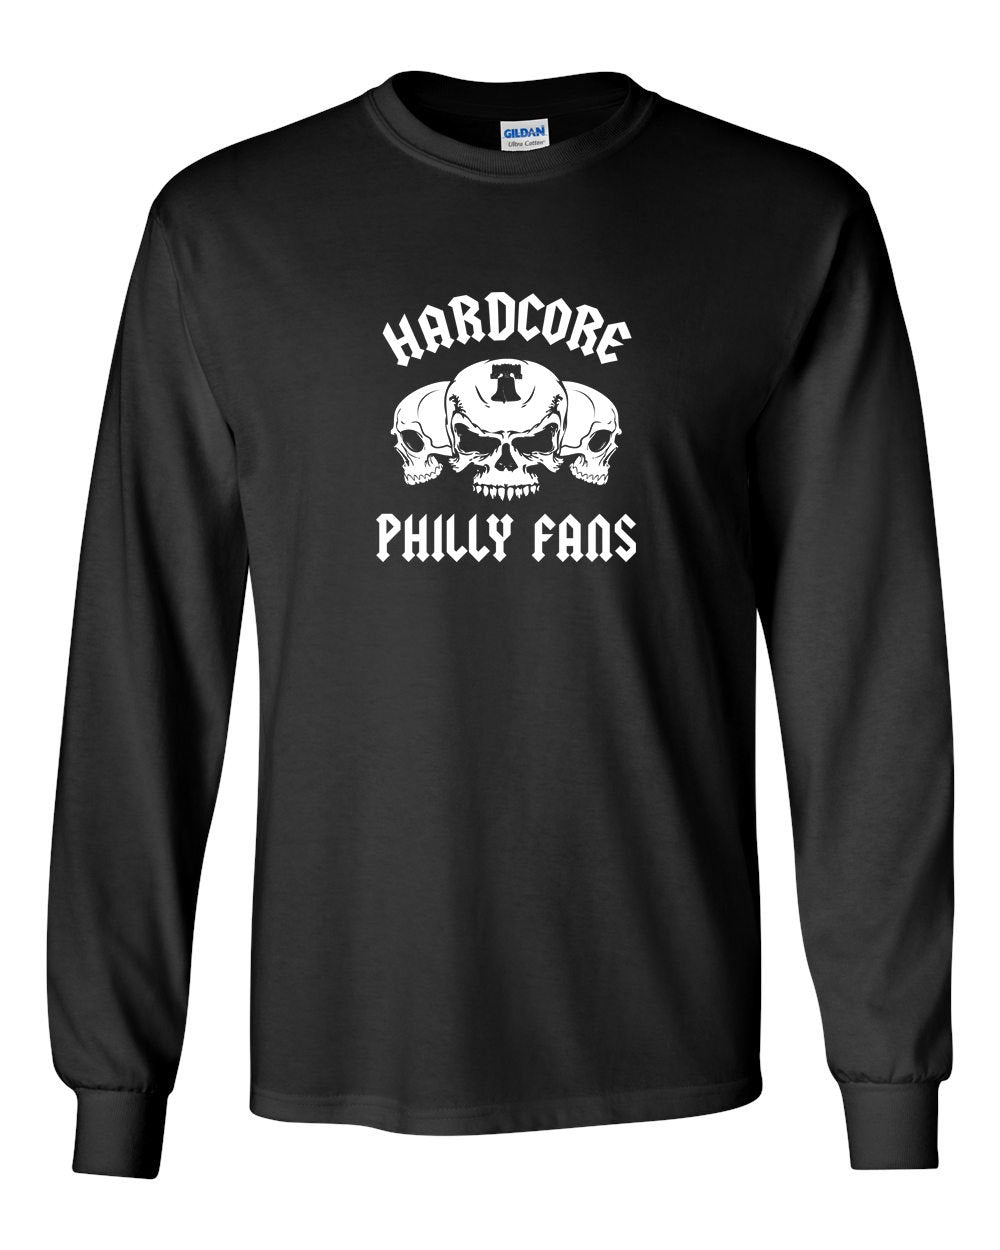 Hardcore Philly Fans MENS Long Sleeve Heavy Cotton T-Shirt